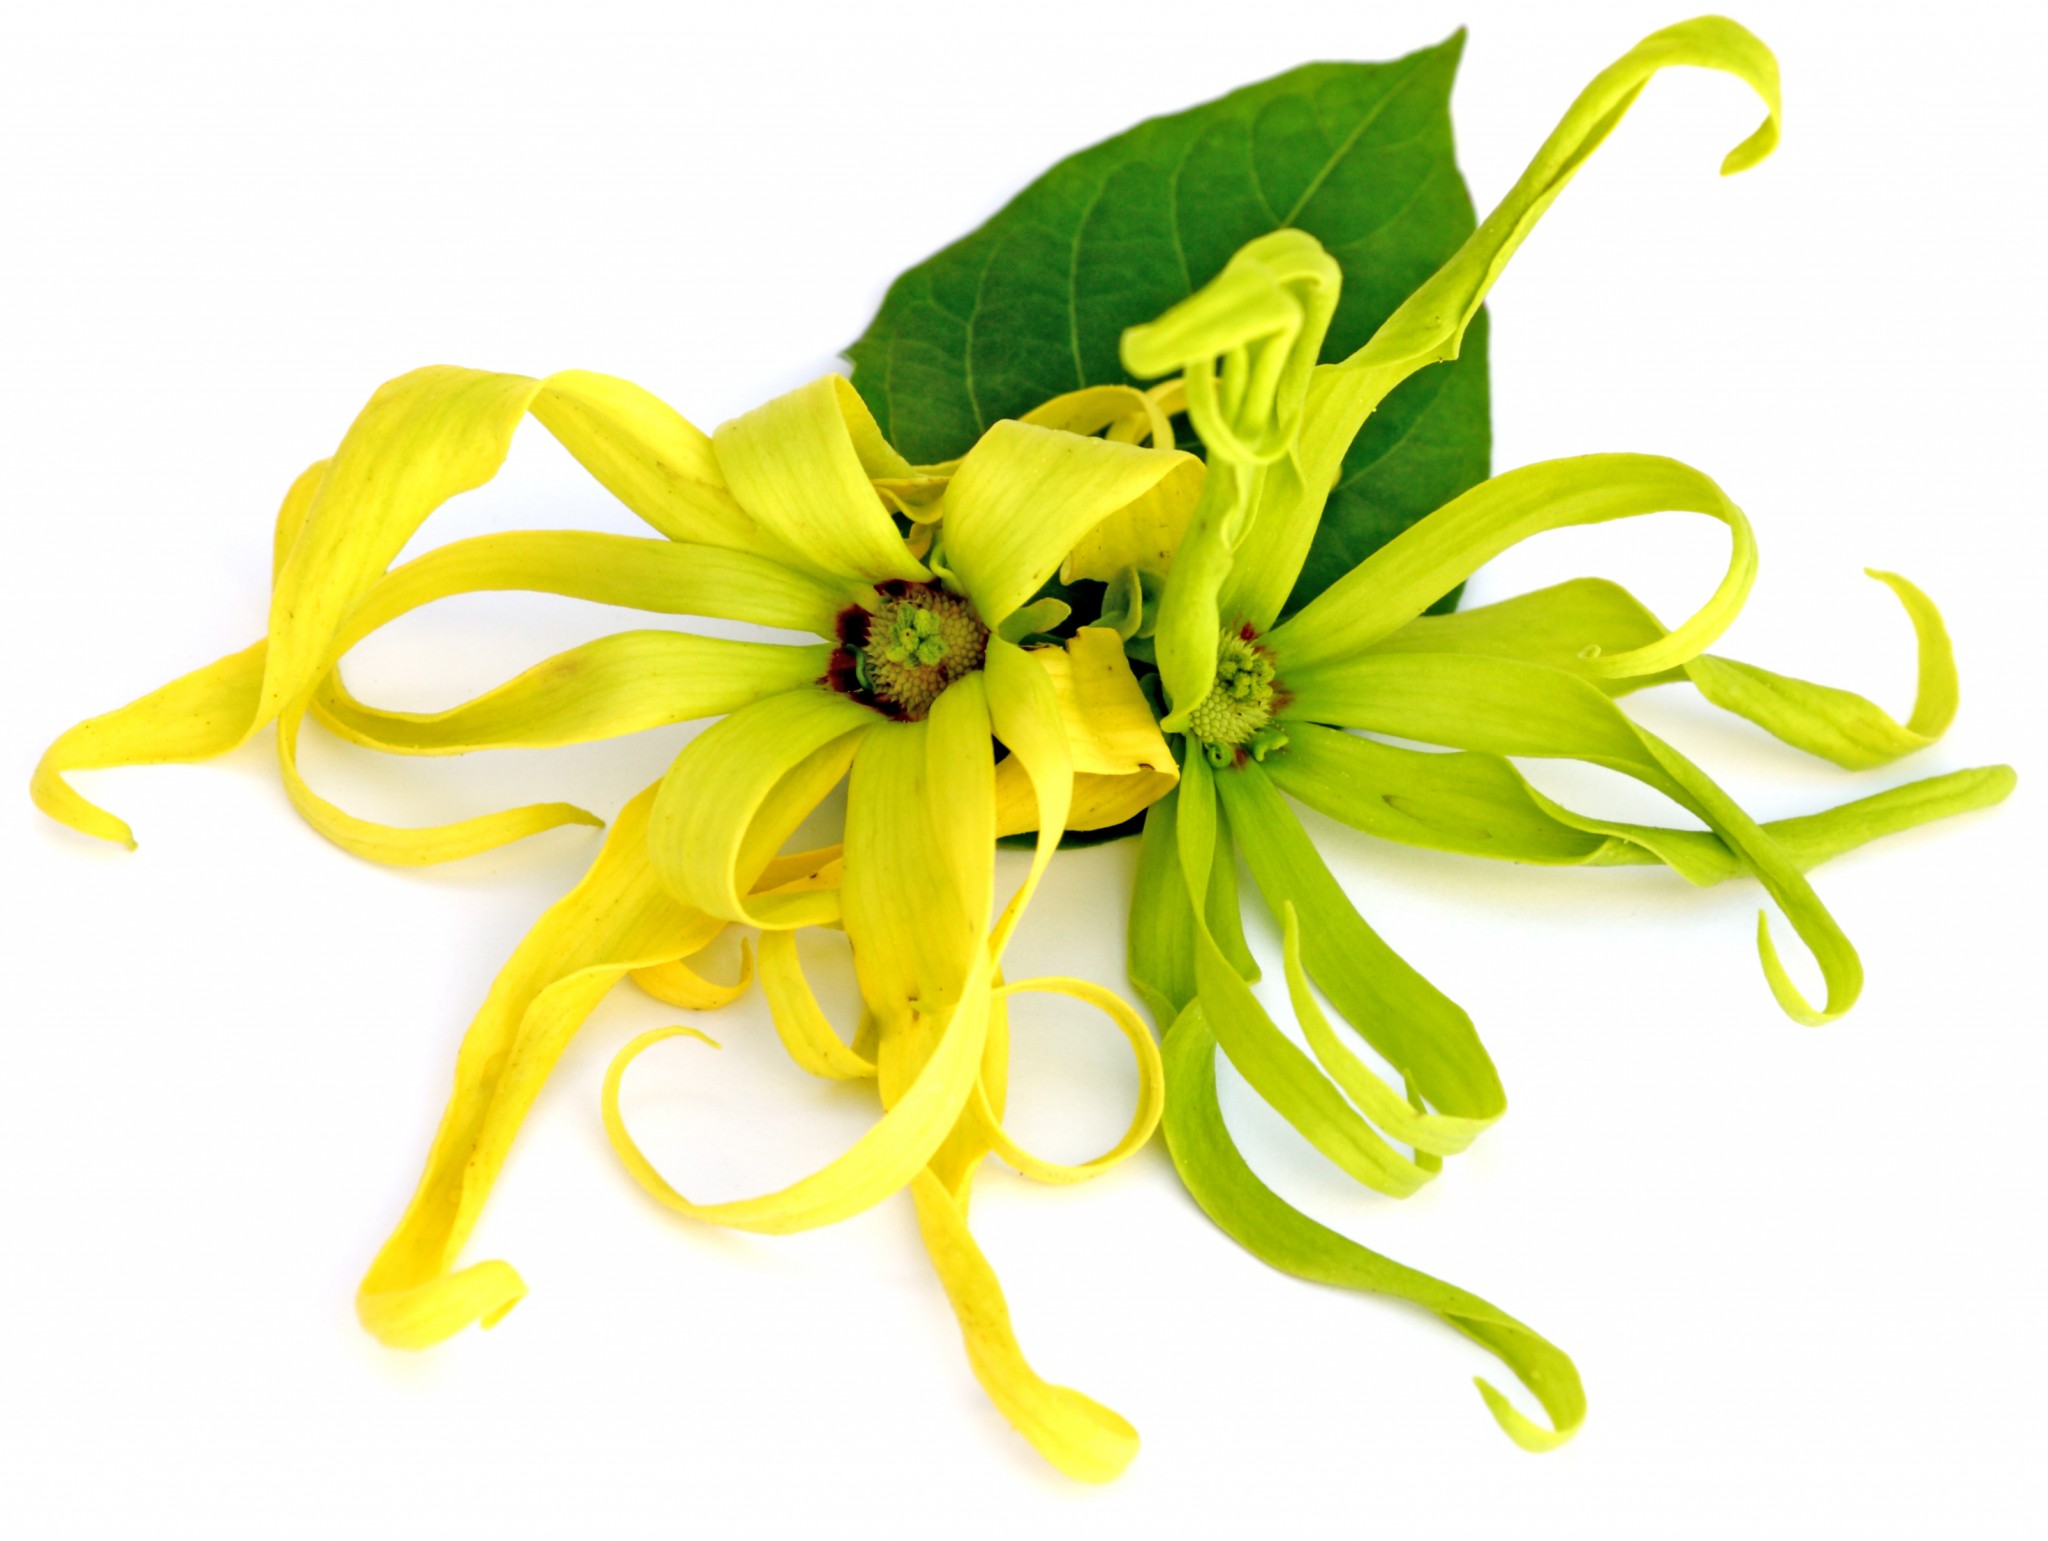 YLANG YLANG TREE ADDS A TOUCH OF CHANEL NO. 5 TO YOUR FLORIDA LANDSCAPE -  ArtisTree ArtisTree